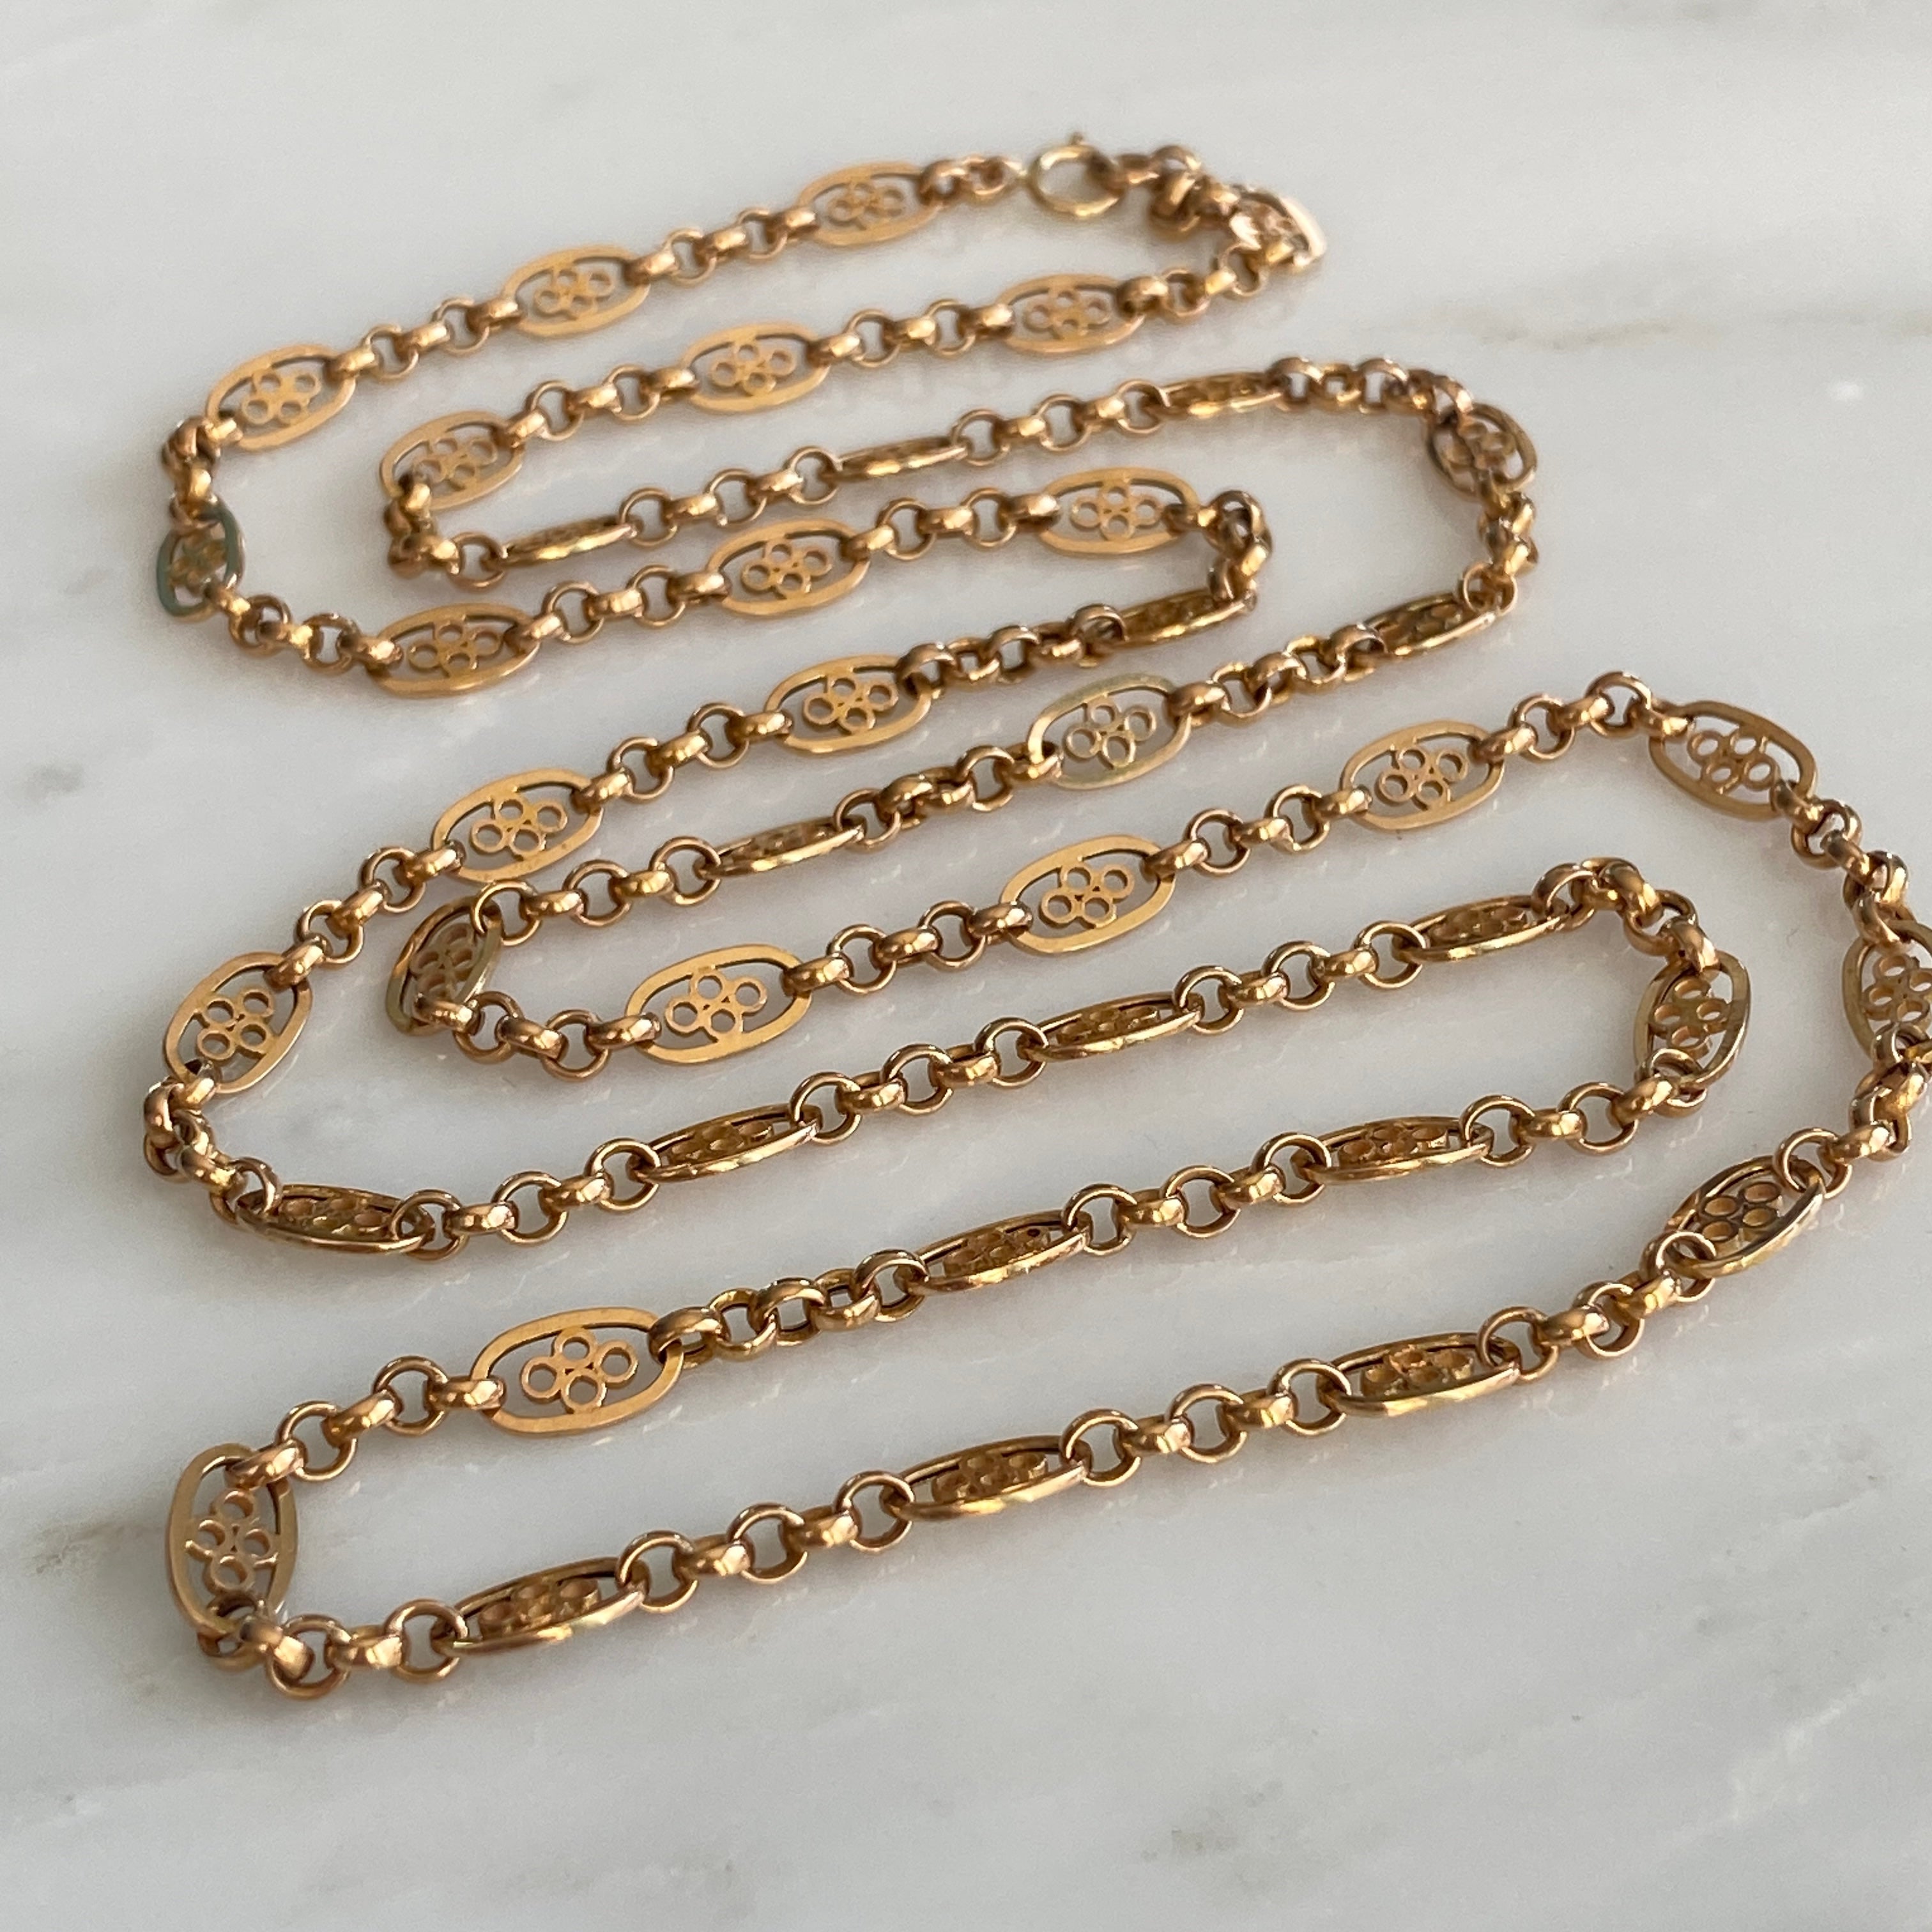 Details:
CHAIN ONLY, LOCKET LISTED SEPARATELY.
Beautiful French filigree 18K gold chain, measuring 29